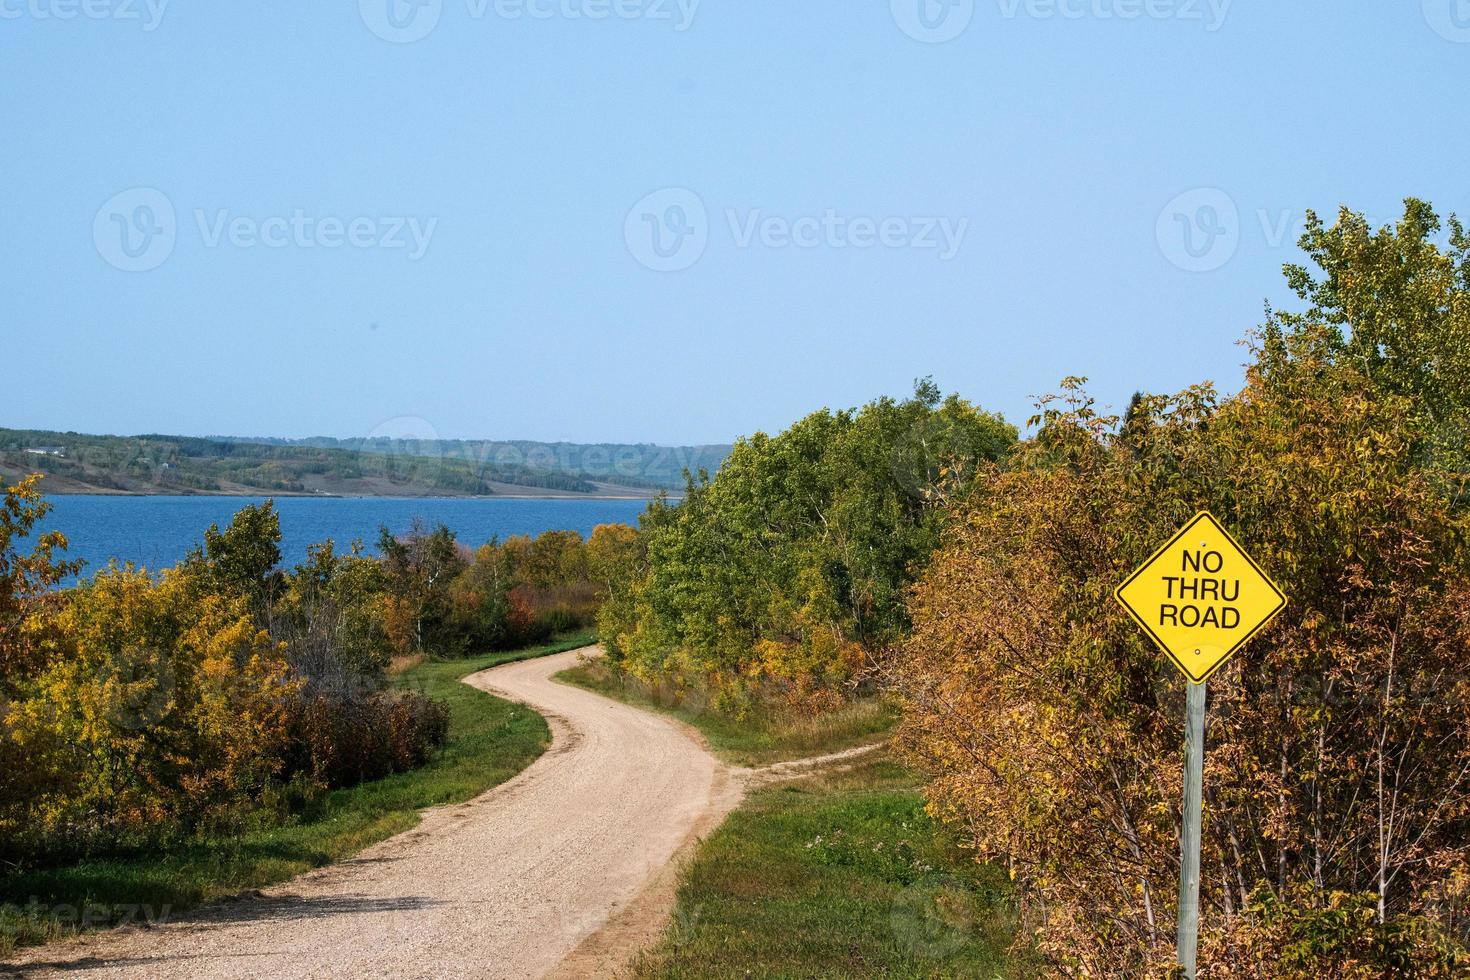 Back country road on the Canadian prairies in fall. photo